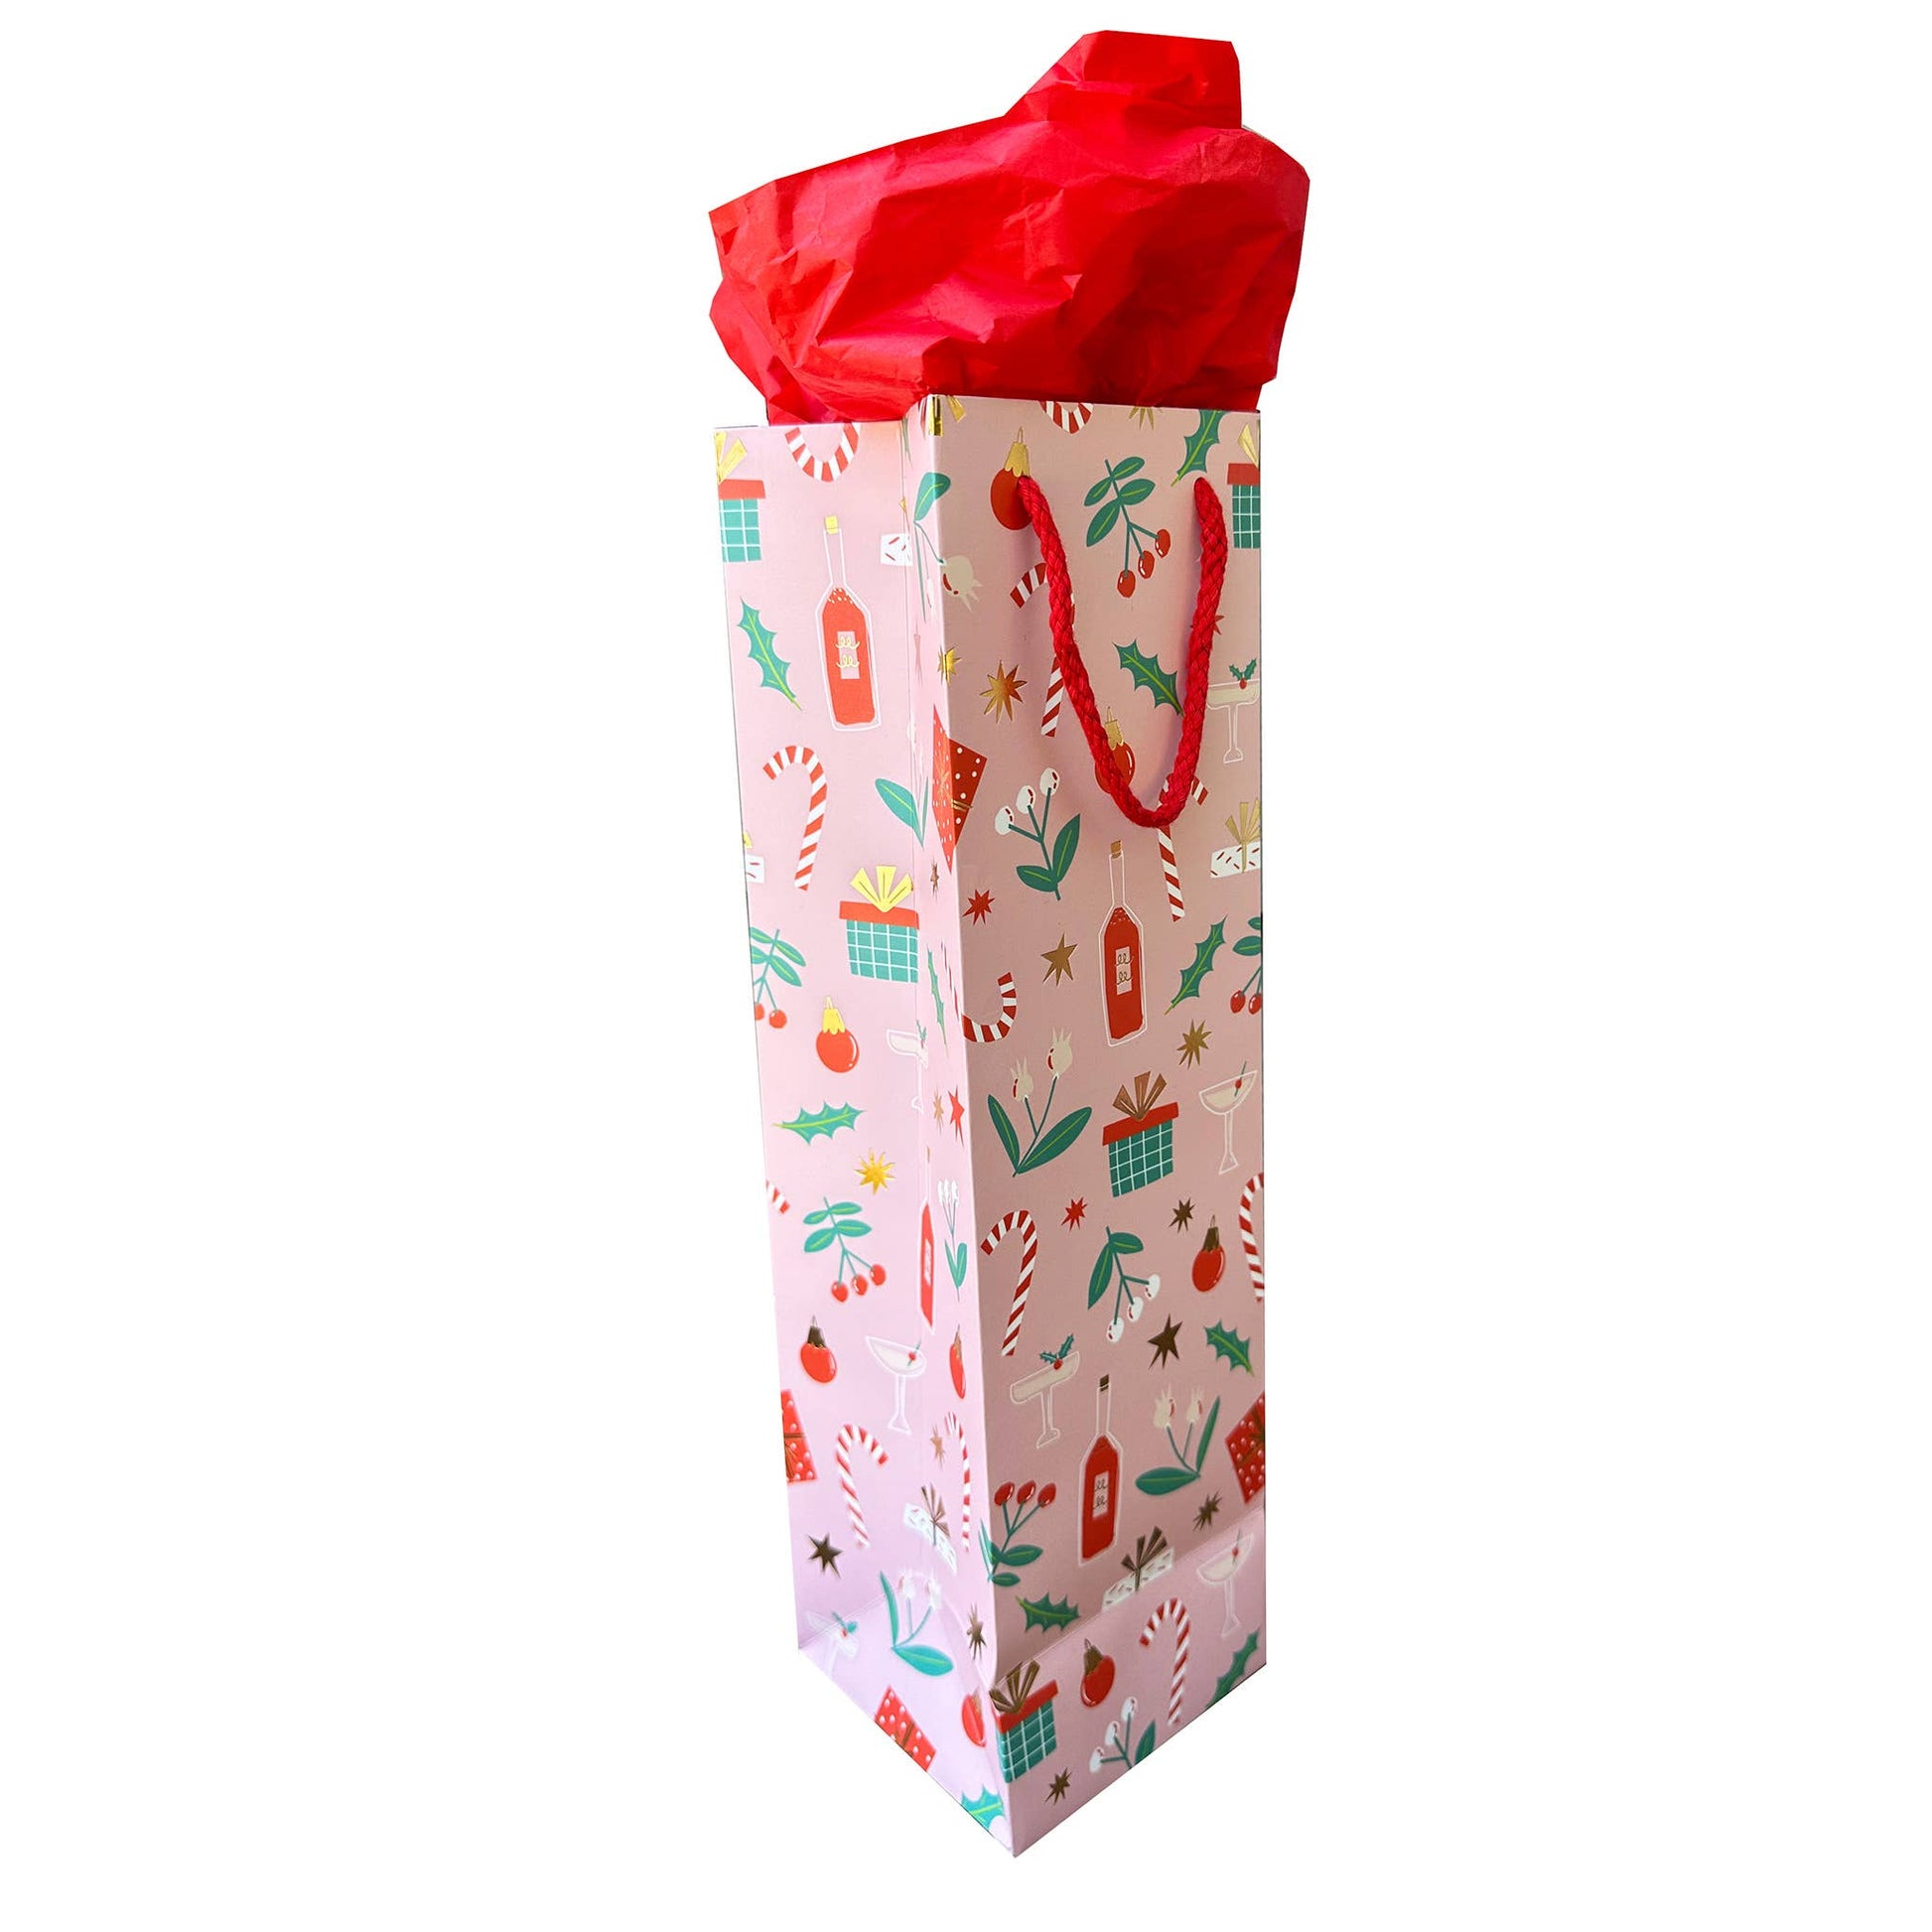 Holiday themed wine gift bag pink with candy canes, presents, ornaments, mistletoe, holly, champagne and wine on it with red cord handle 